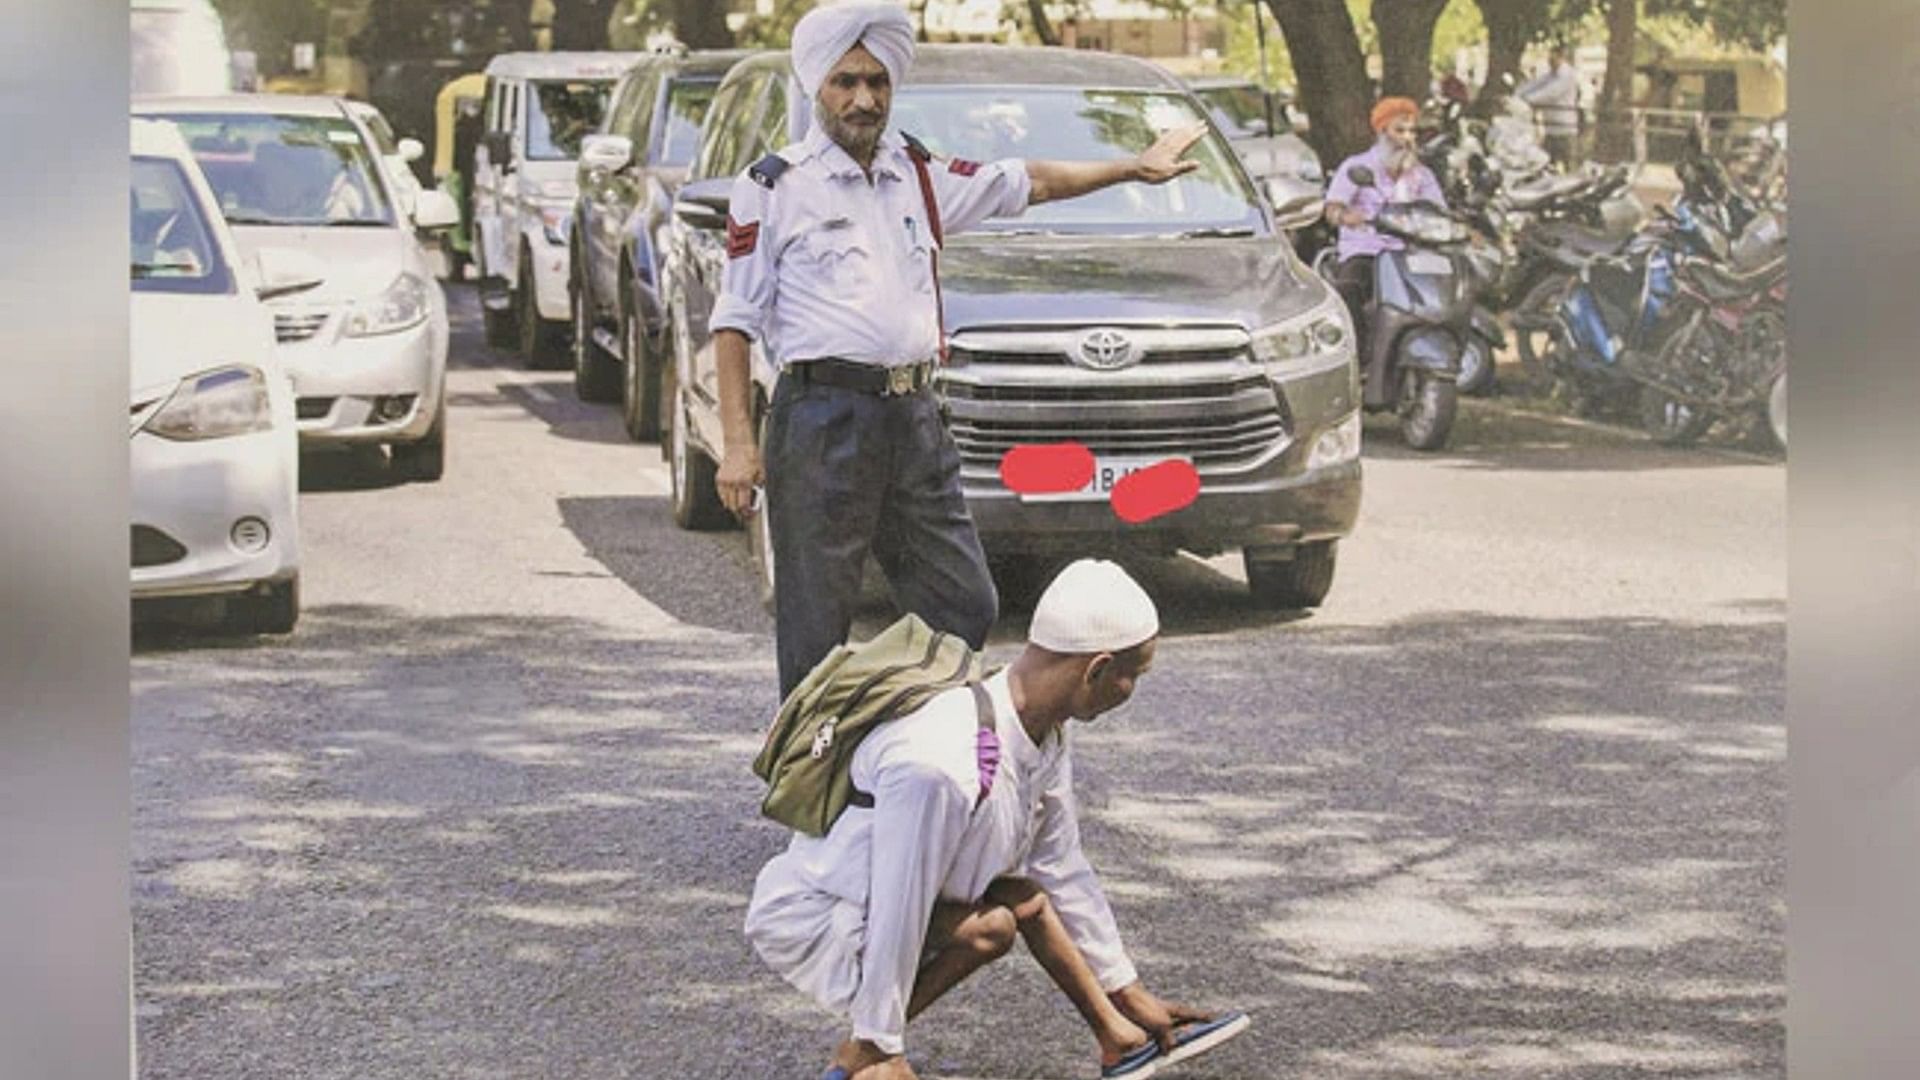 heart touching picture police stopped all vehicles to make Handicap cross the road